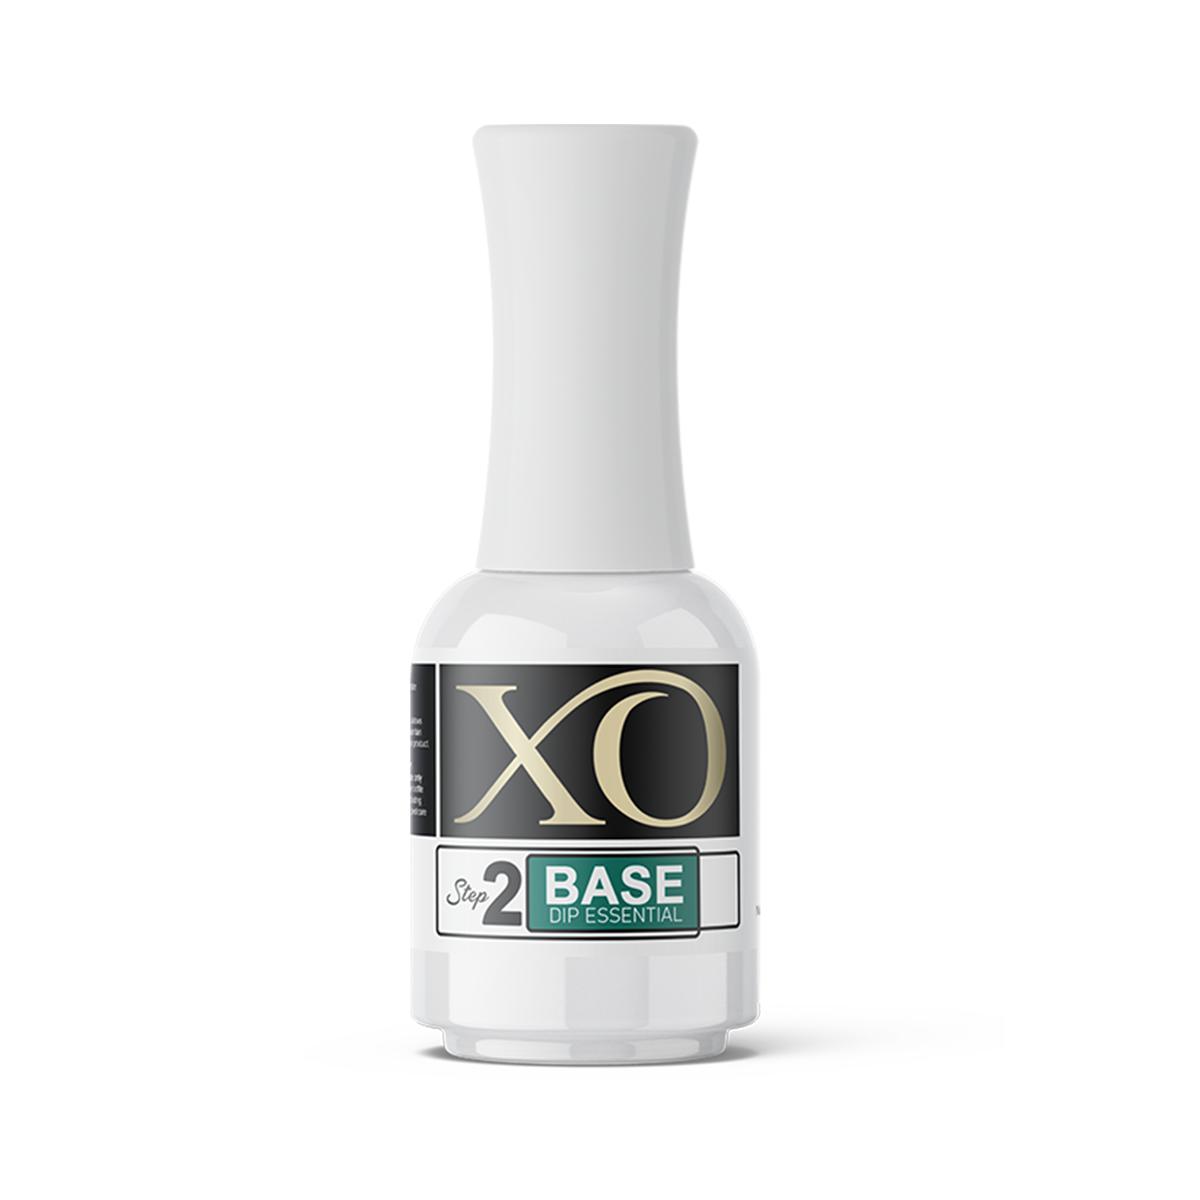 XO Dipping Essential - Base Dip (0.5oz/15ml) for Dipping Manicures-Nails Deal & Beauty Supply- Nail Supply American Gel Polish - Phuong Ni